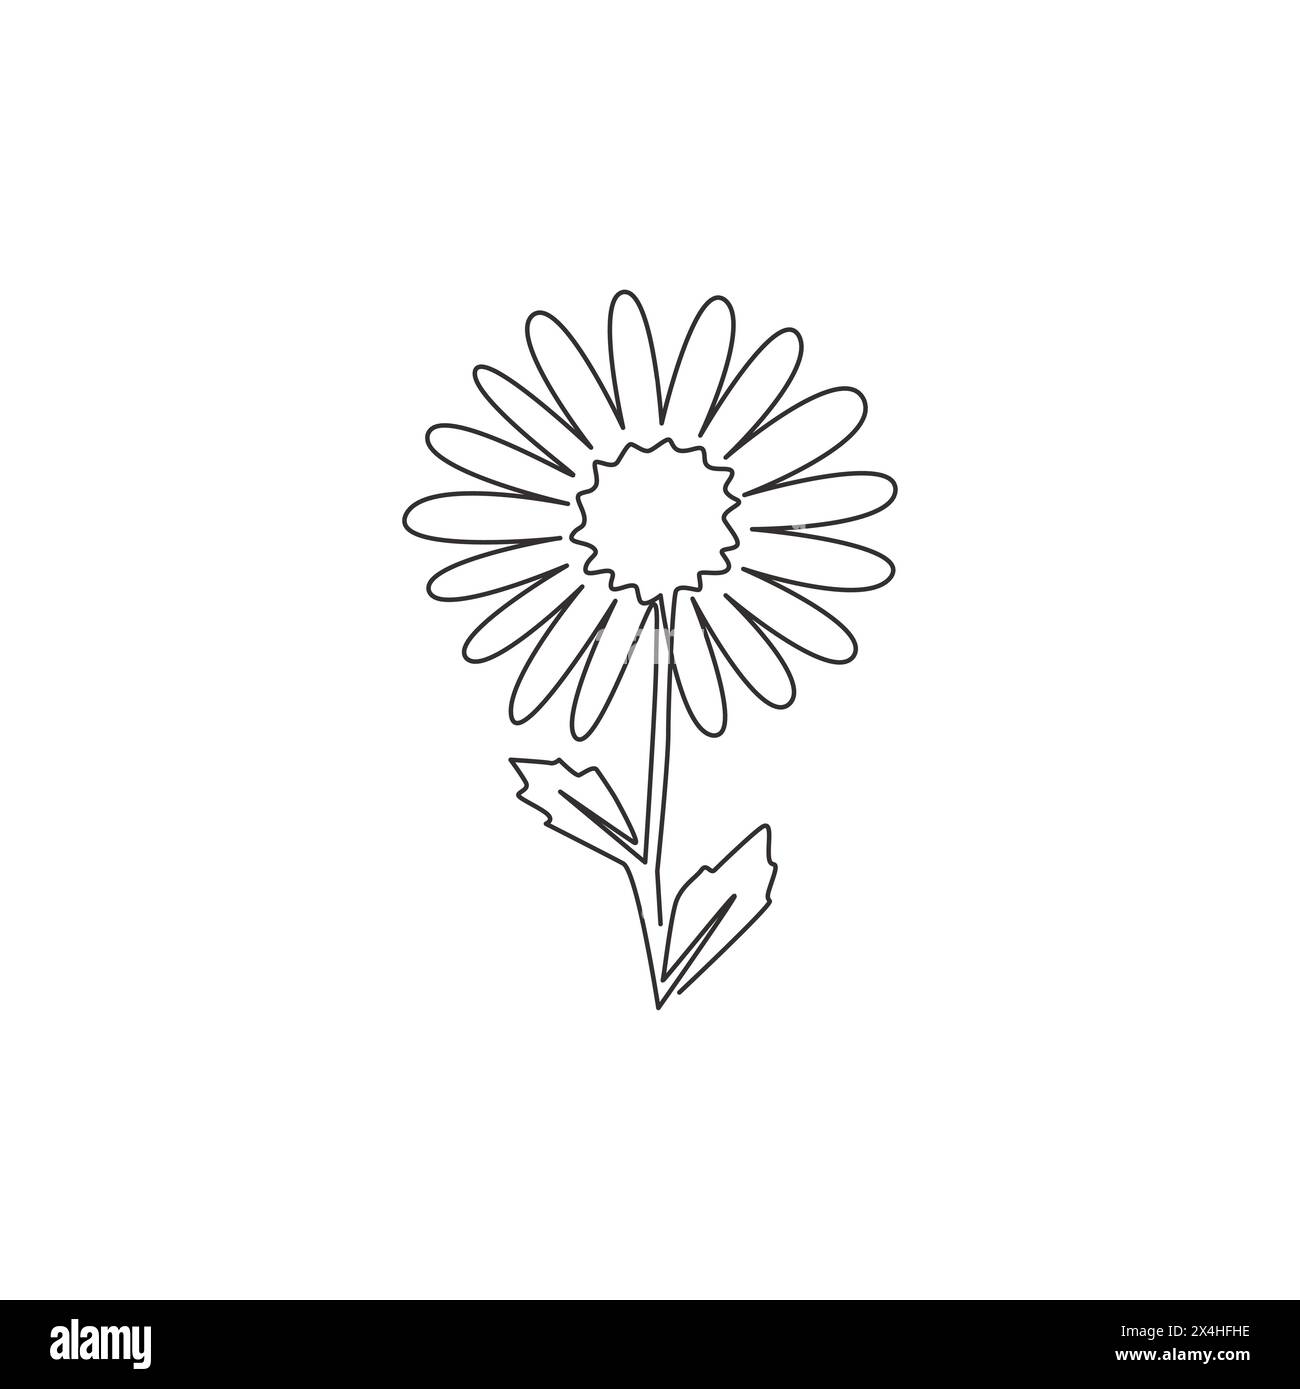 One continuous line drawing of beauty fresh bellis perennis for wall decor art poster. Printable decorative daisy flower concept for fabric textile. M Stock Vector